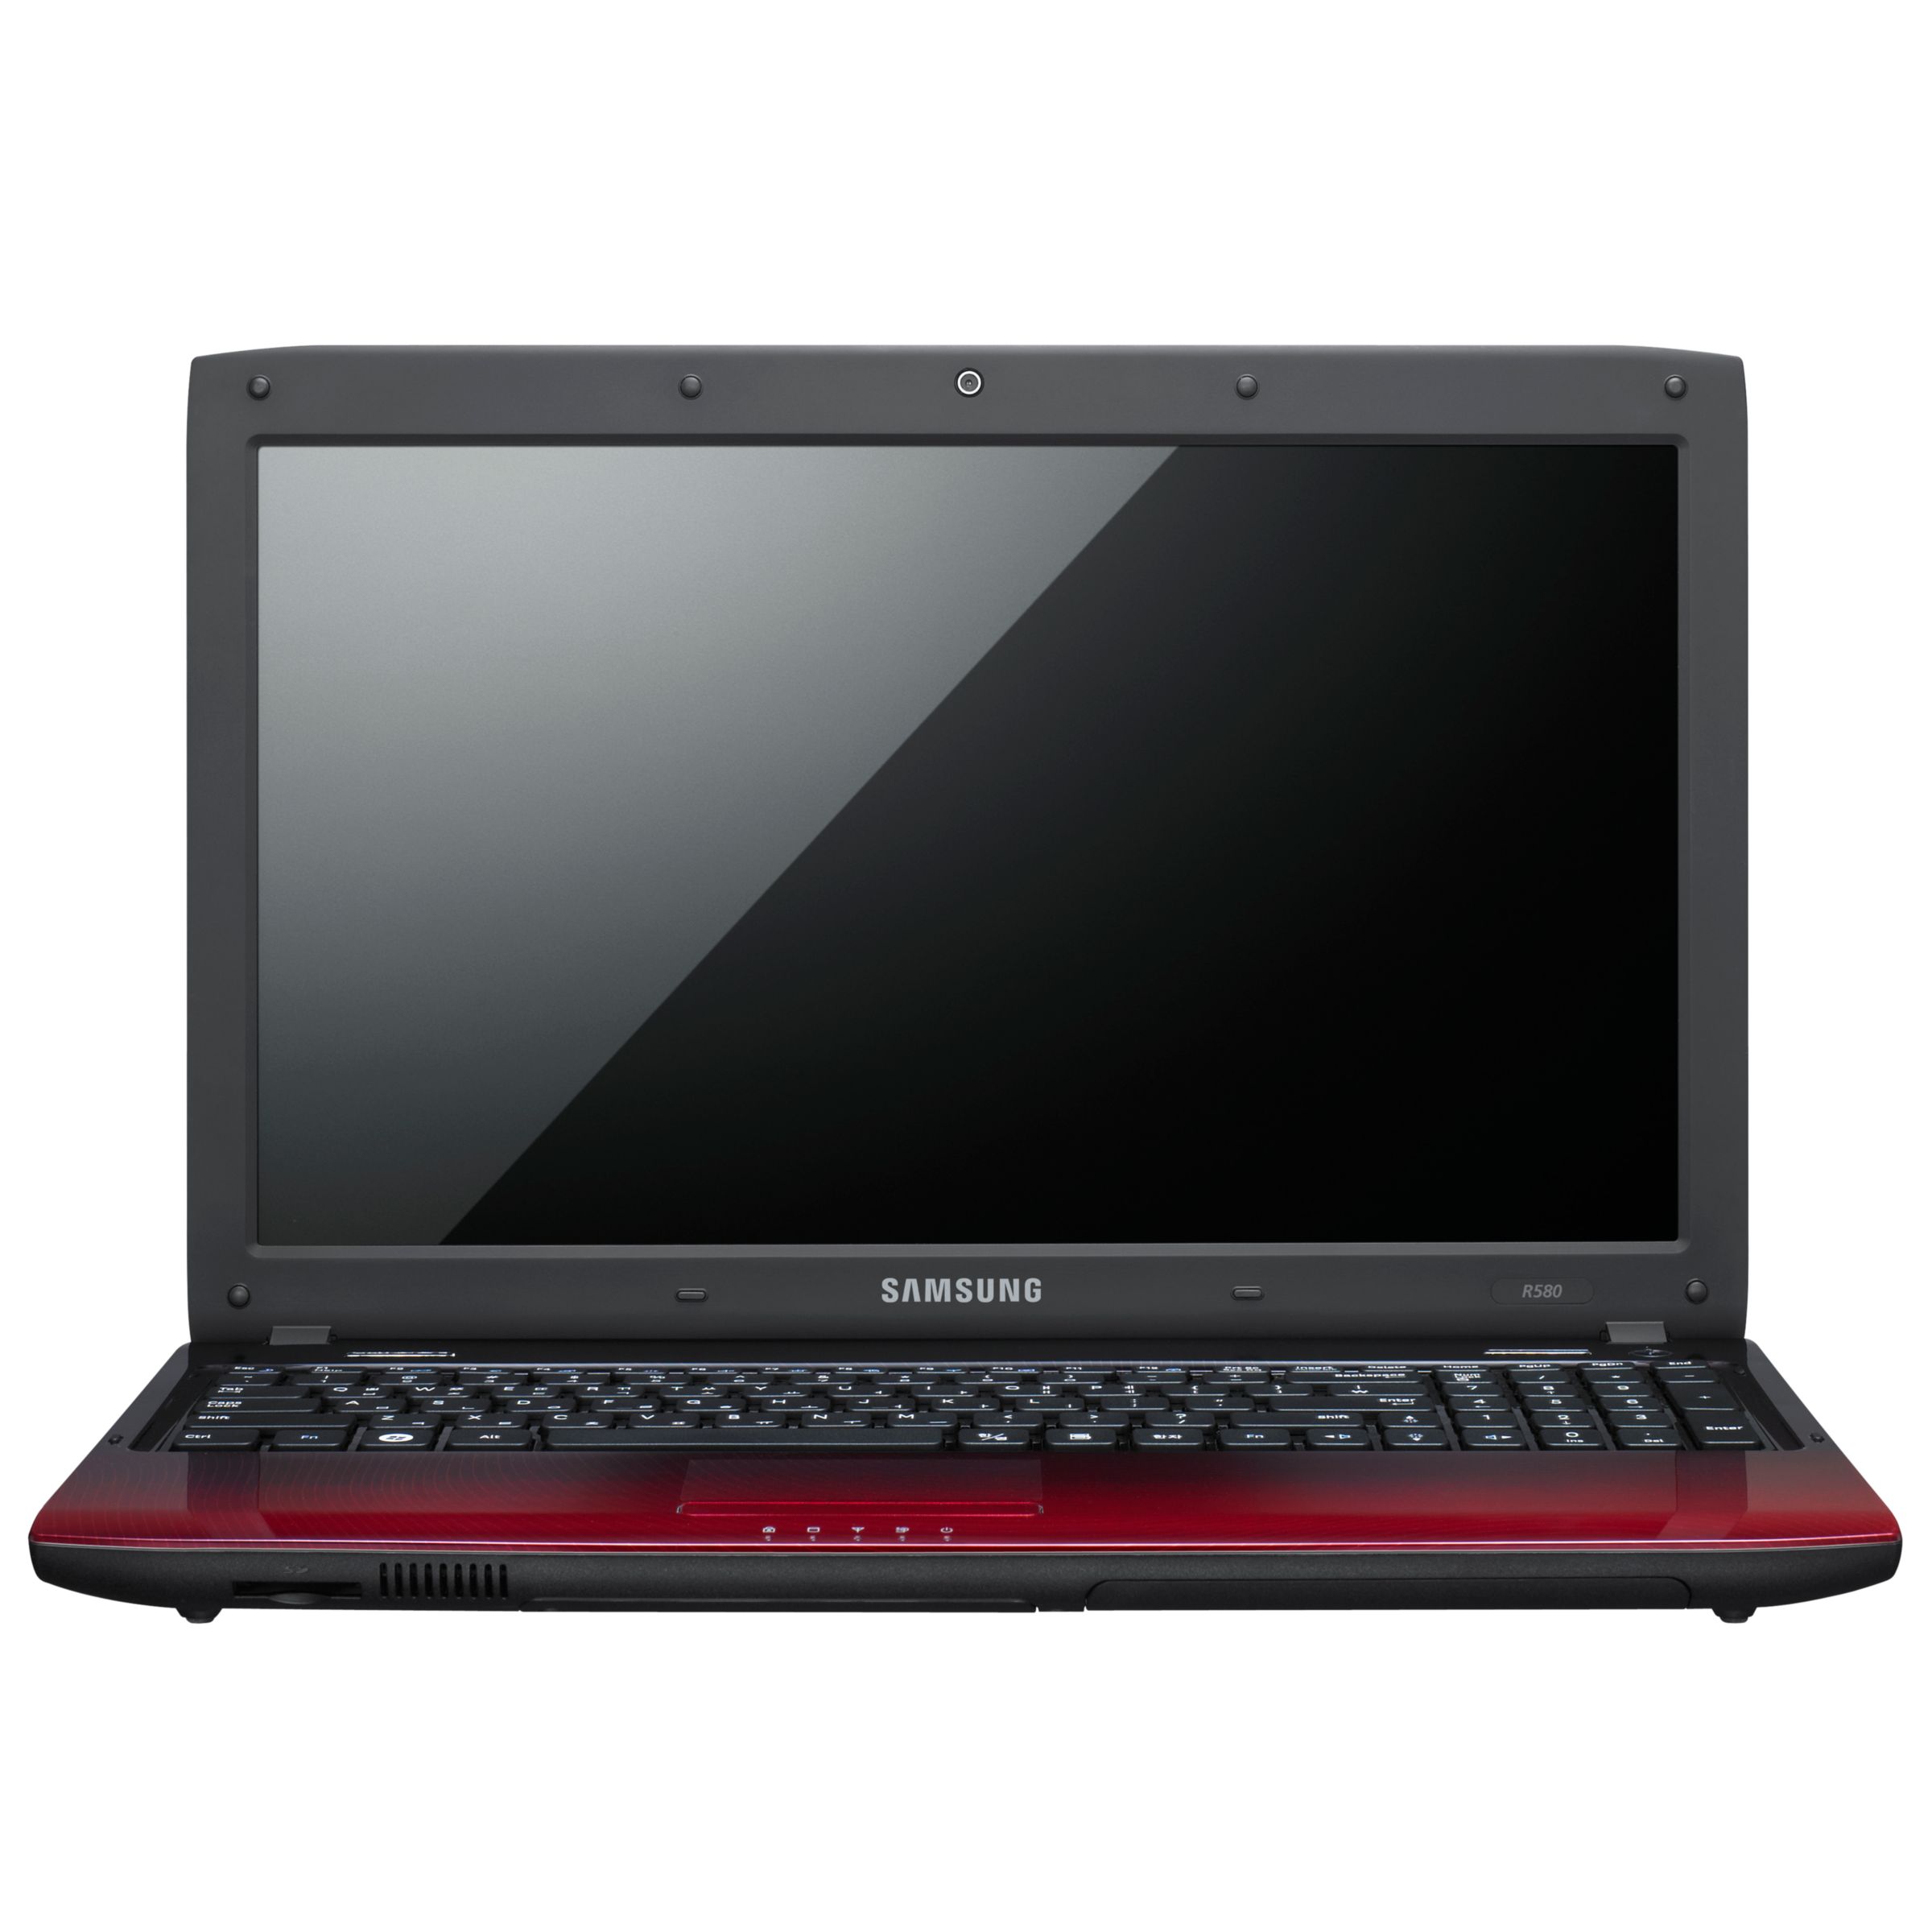 Samsung R580 Laptop, Intel Core i3, 500GB, 2.13GHz, 4GB RAM with 15.6 Inch Display, Red at John Lewis